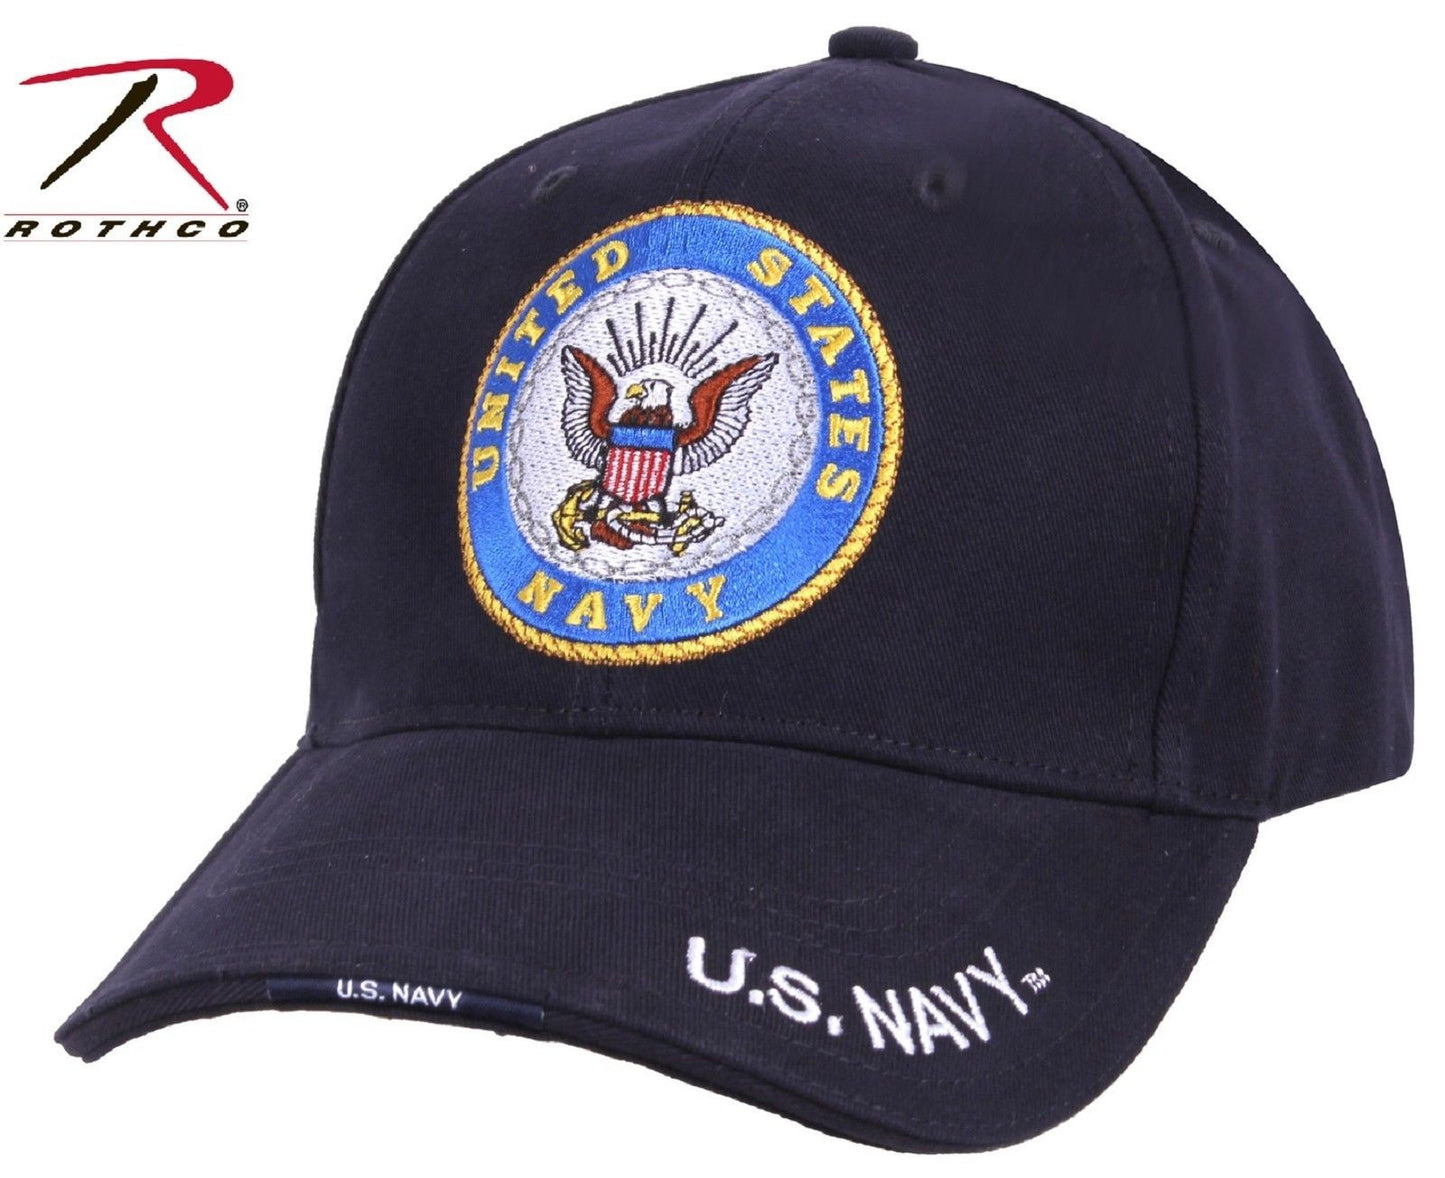 United States Navy Deluxe Low Profile Adjustable Baseball Cap Rothco US Navy Hat